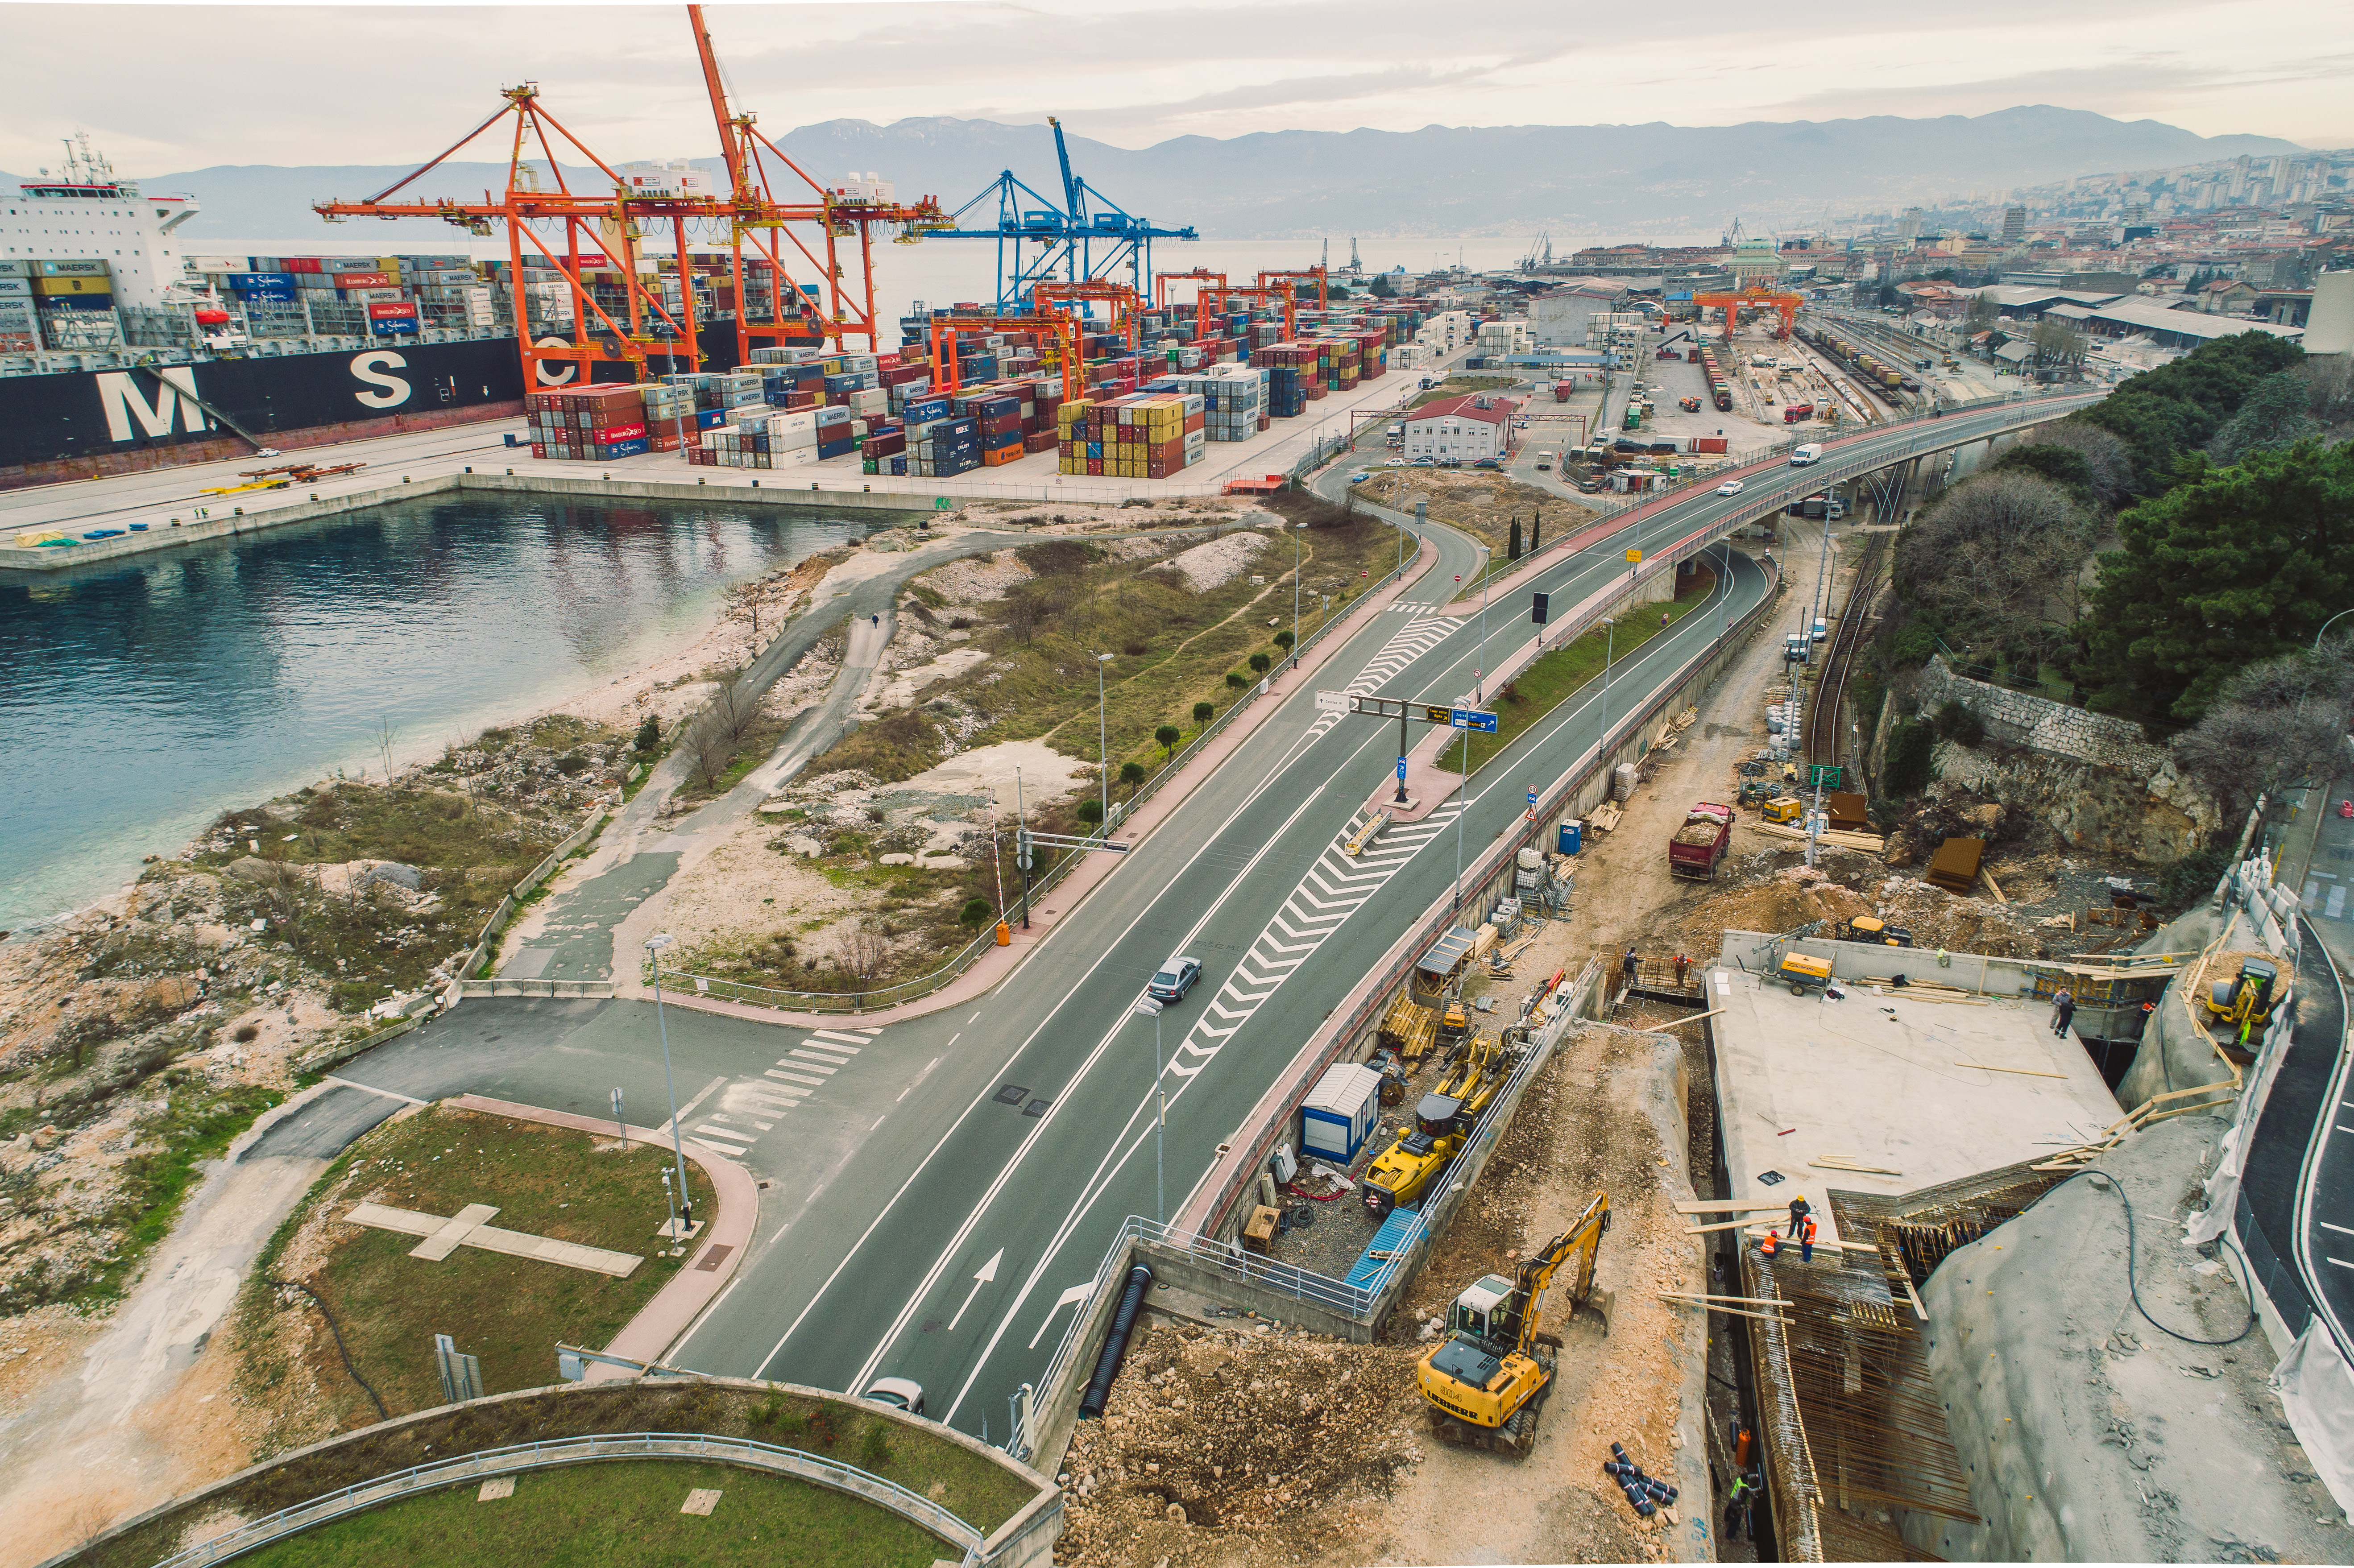 Development of the multimodal platform in the Port of Rijeka and interconnection with the Adriatic Gate Container Terminal (POR2CORE-AGCT)